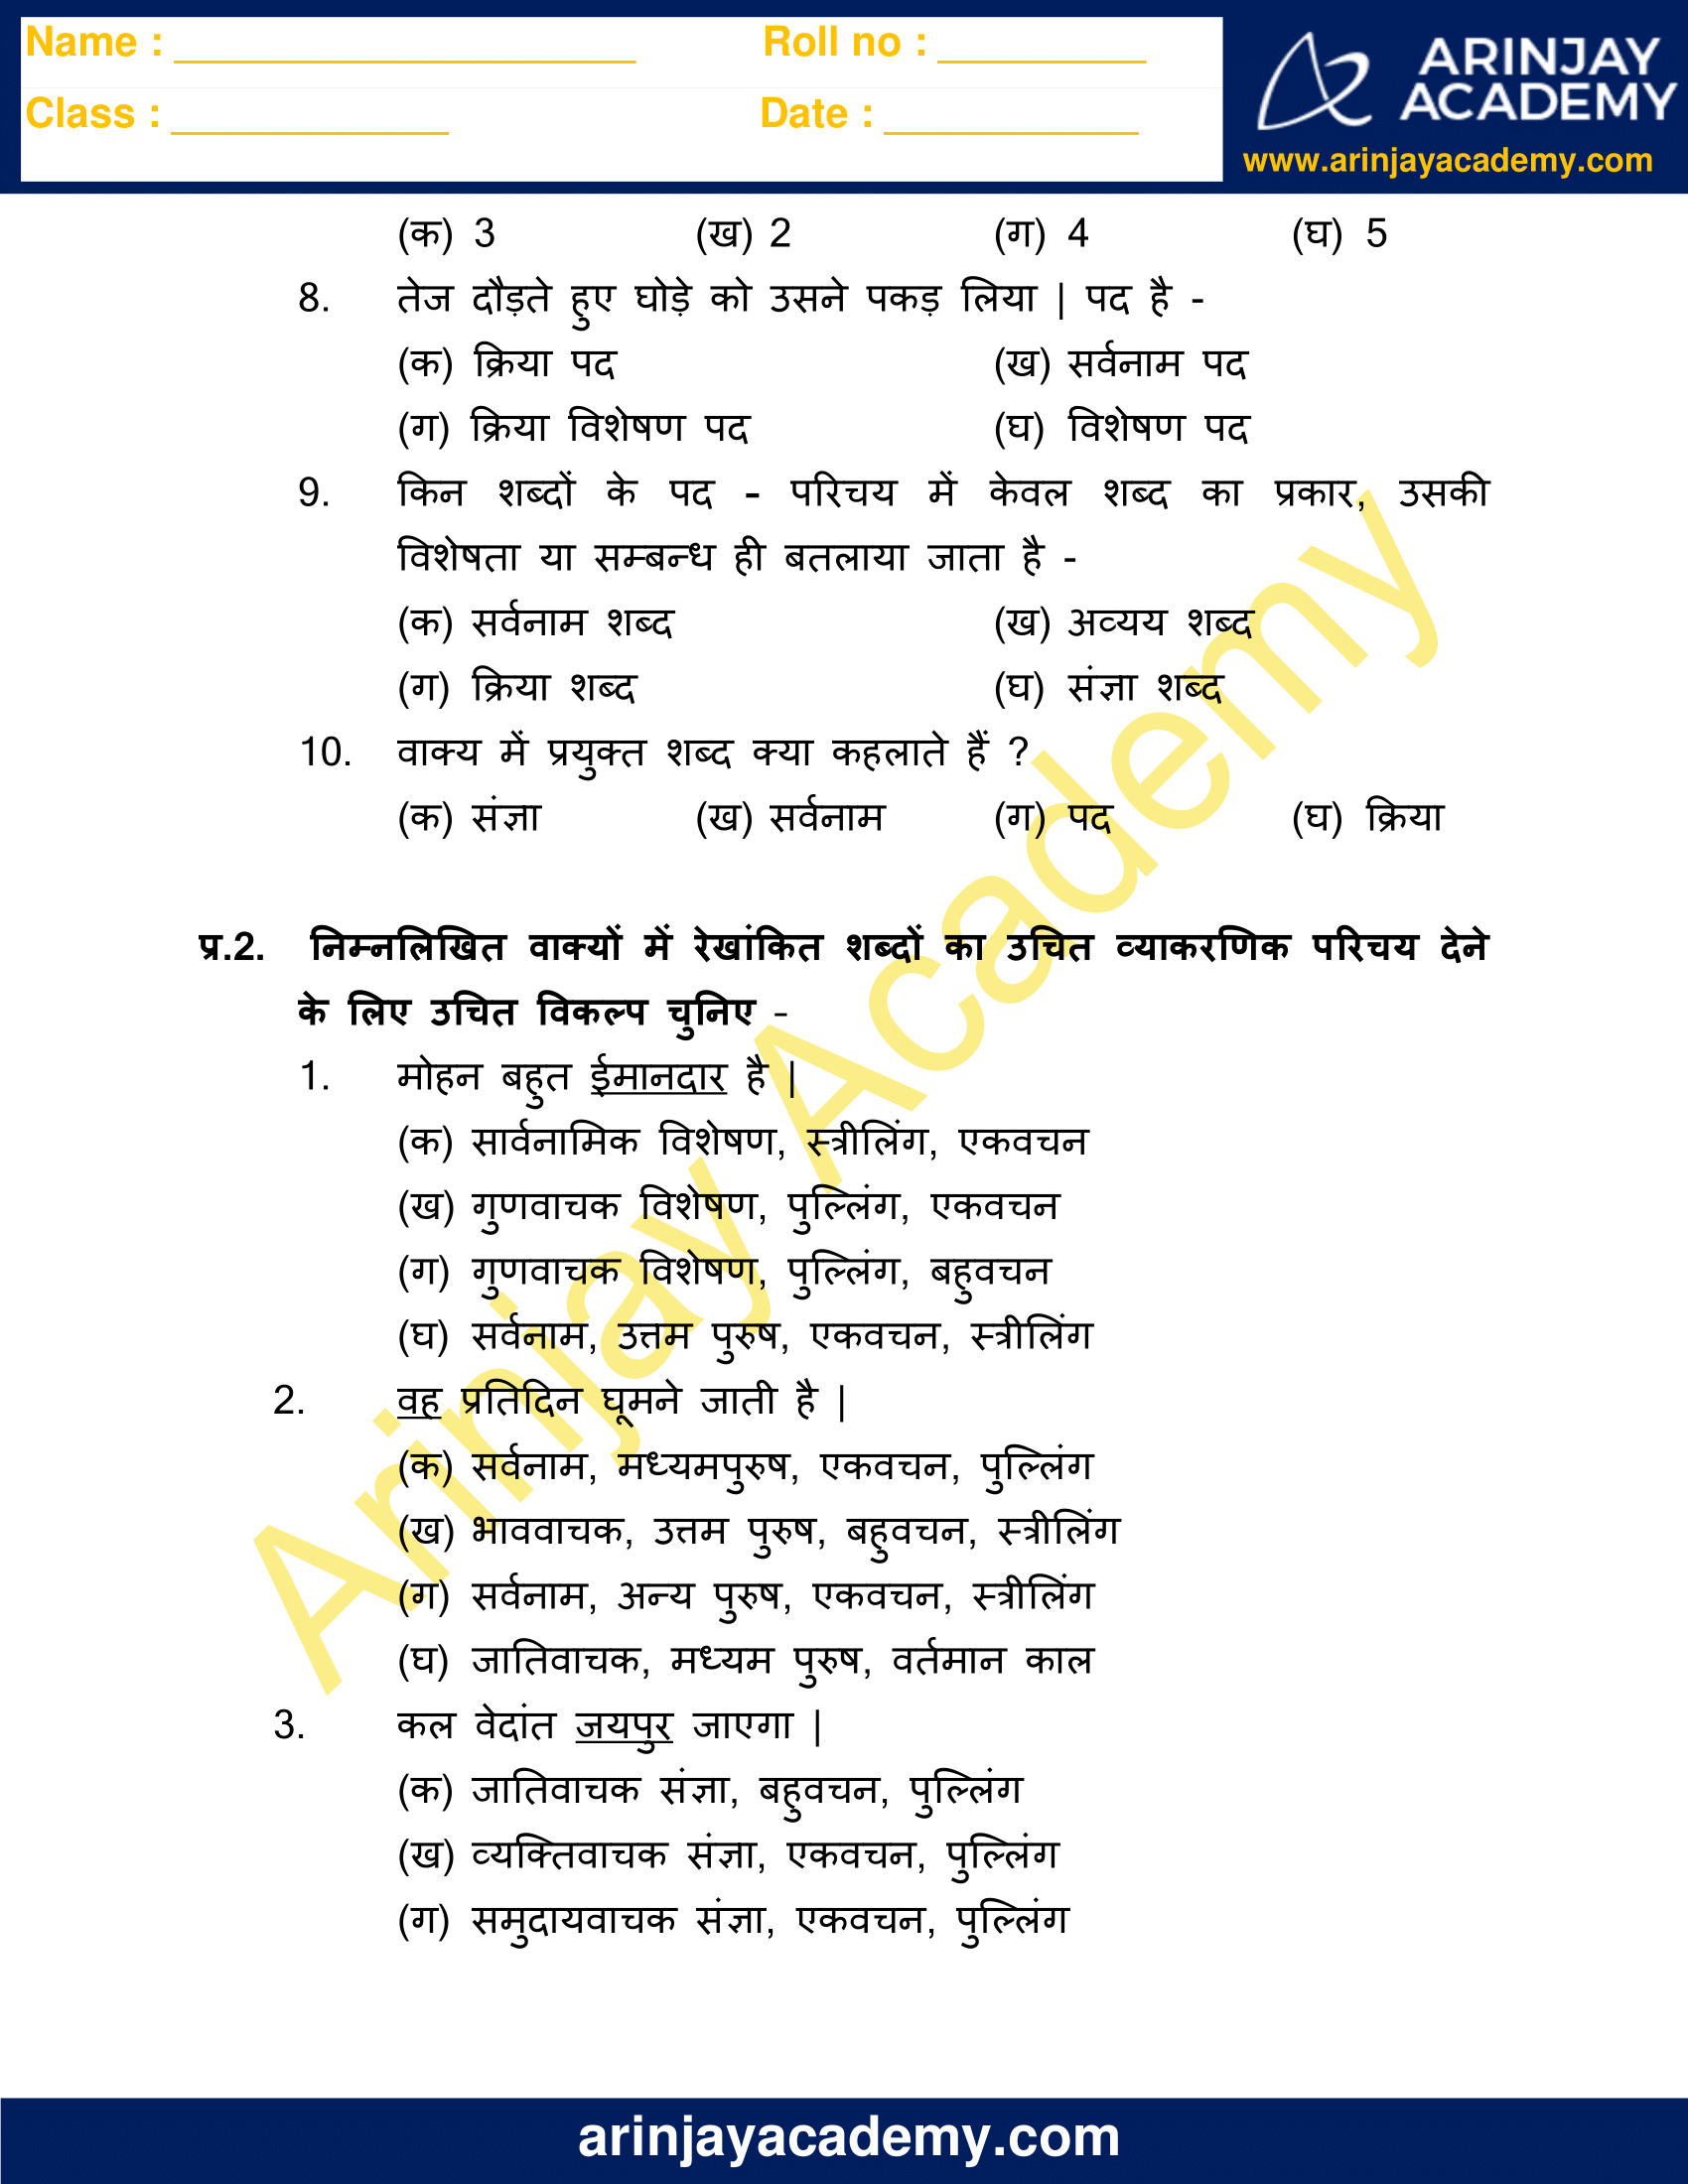 Pad Parichay Exercises with Answers Class 10 image 2